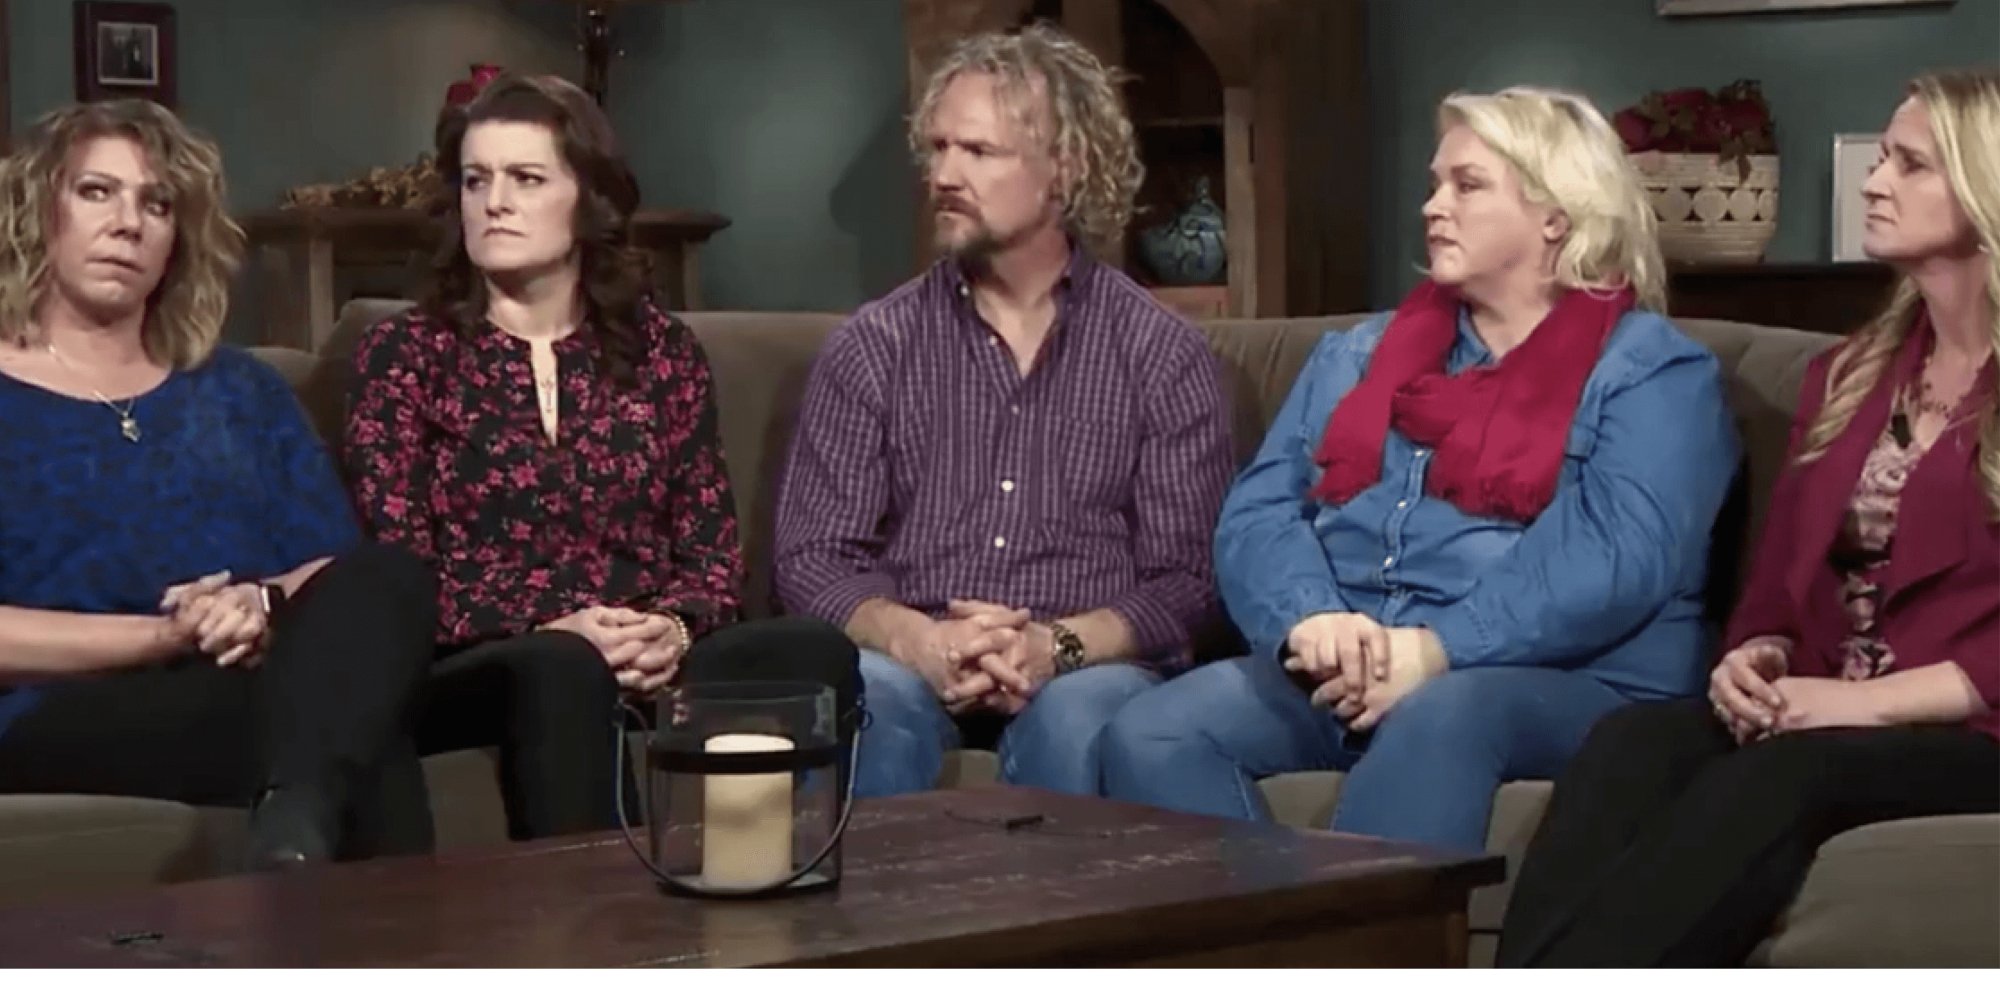 'Sister Wives' Star, Robyn Brown, Once Claimed Her Kids 'Asked' for a